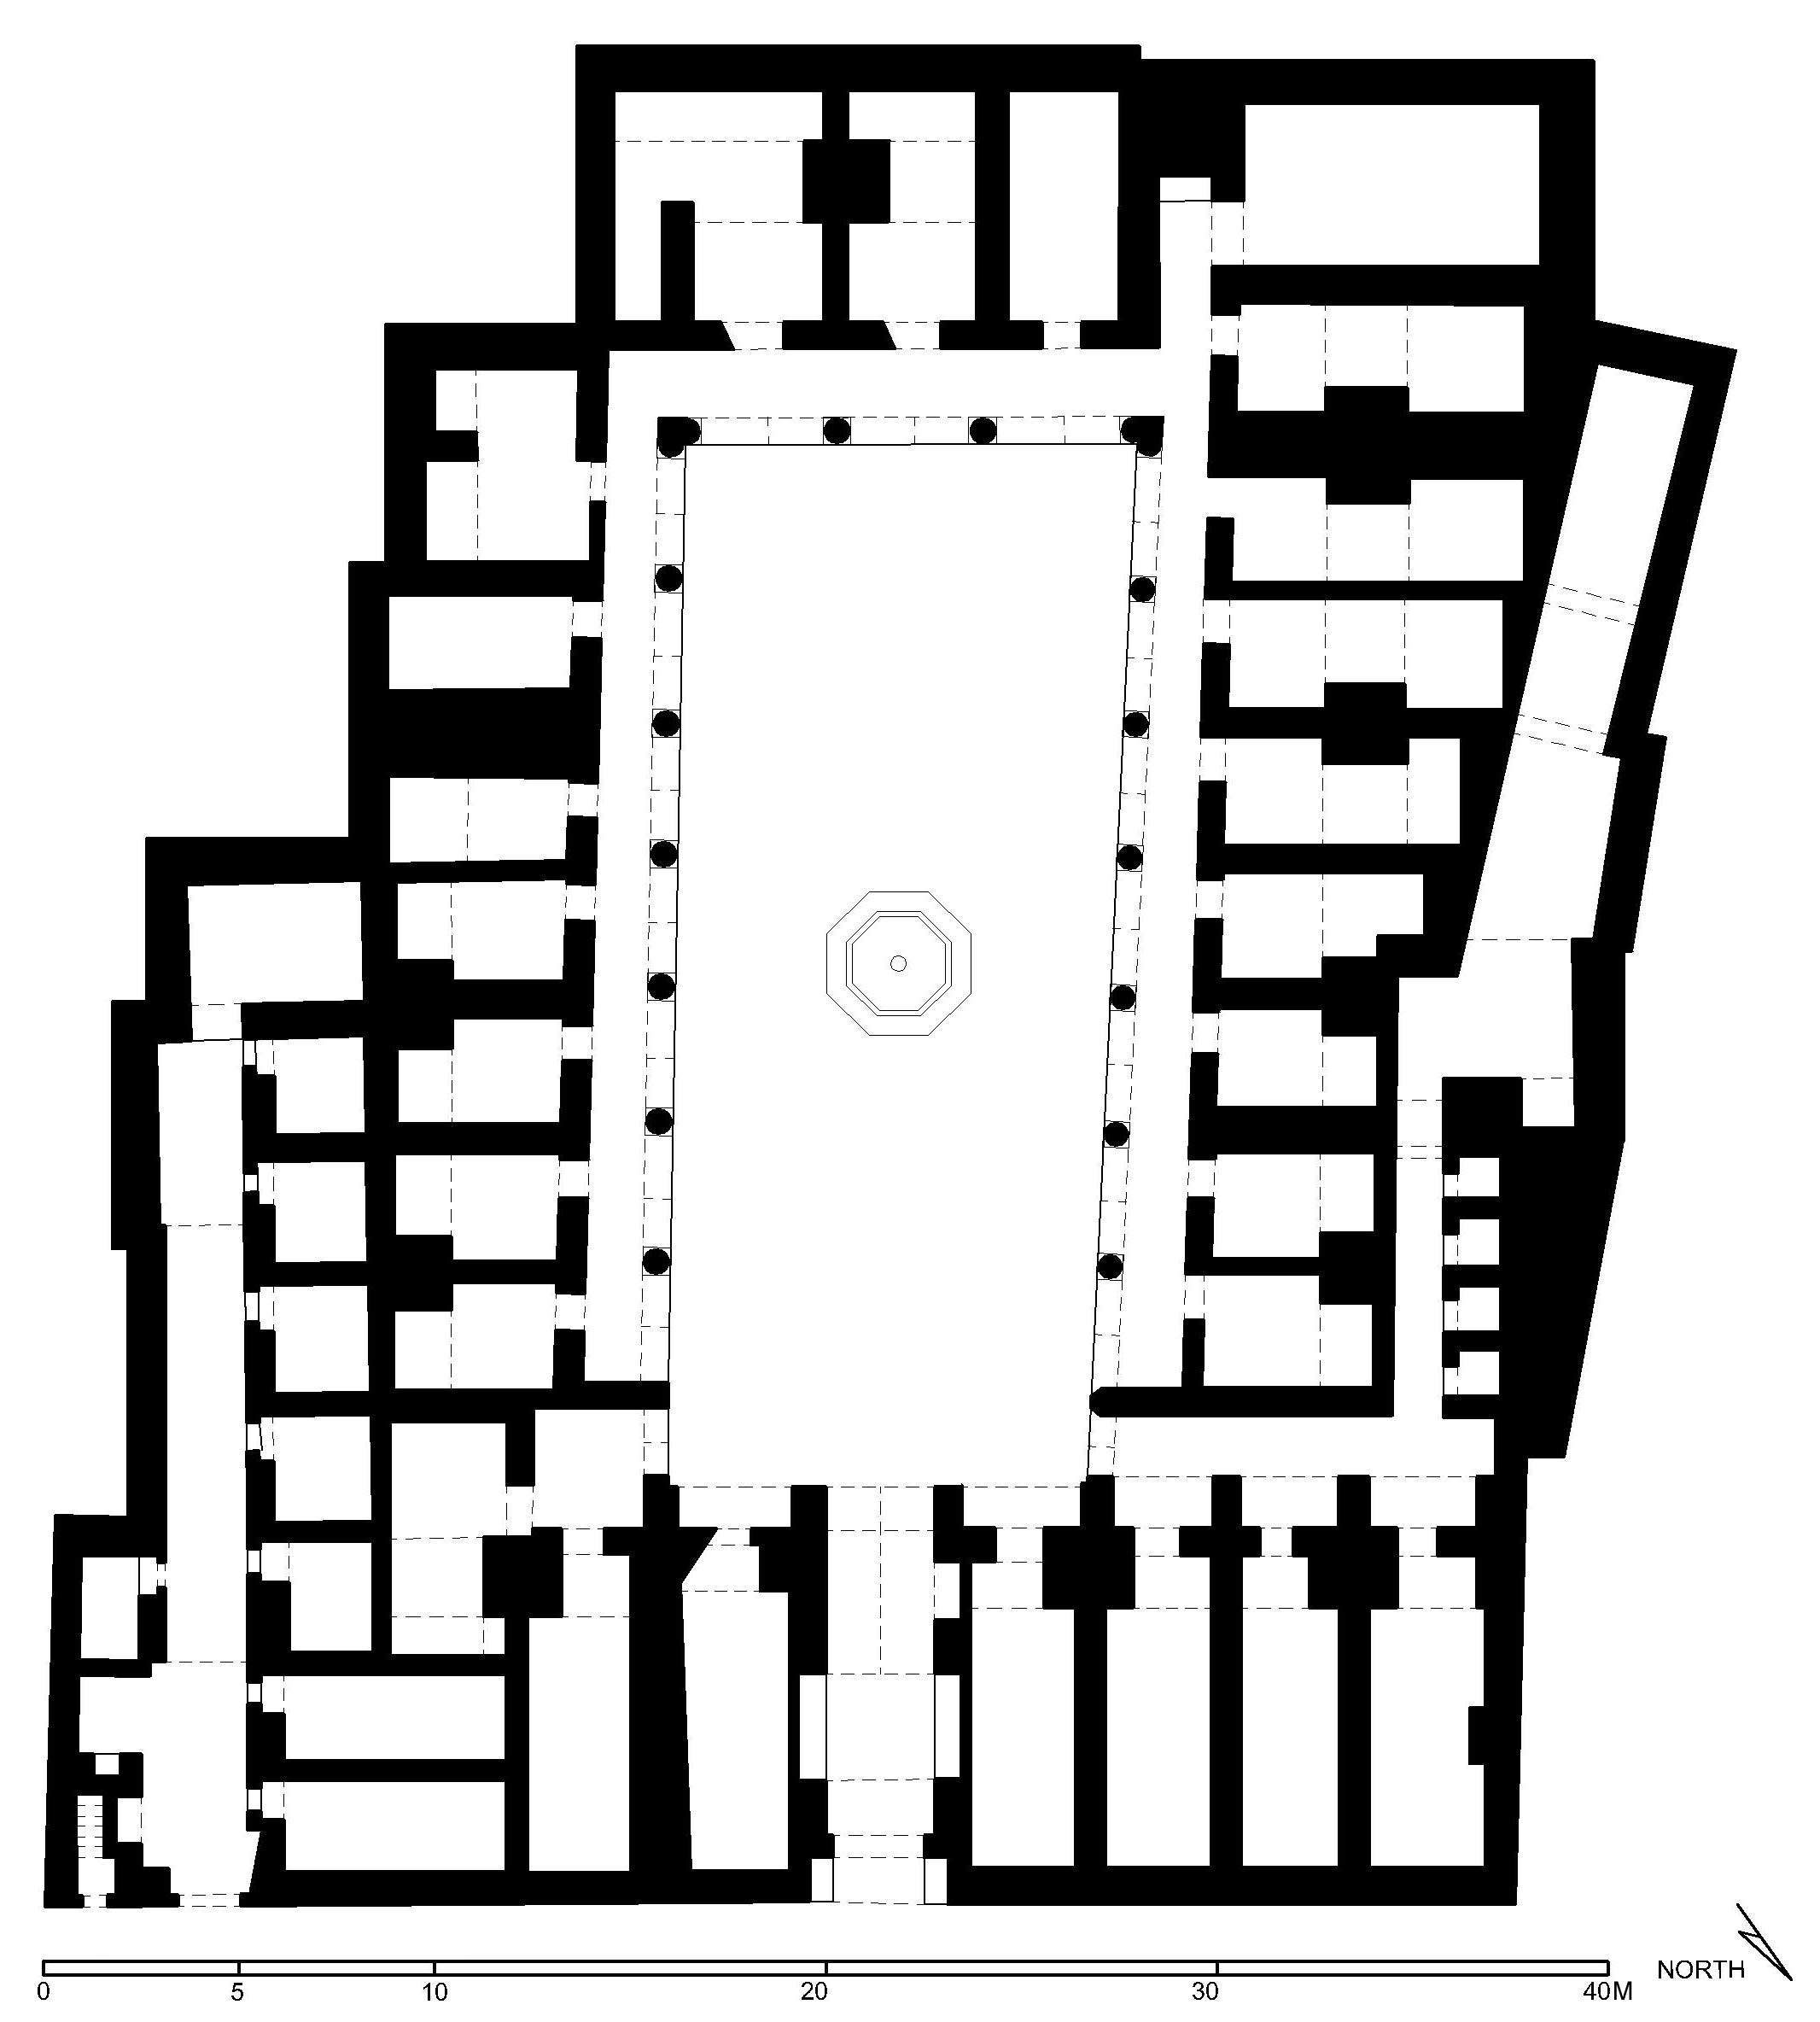 Wakala Qansuh al-Ghawri - Floor plan of wikala (after Meinecke) in AutoCAD 2000 format. Click the download button to download a zipped file containing the .dwg file.